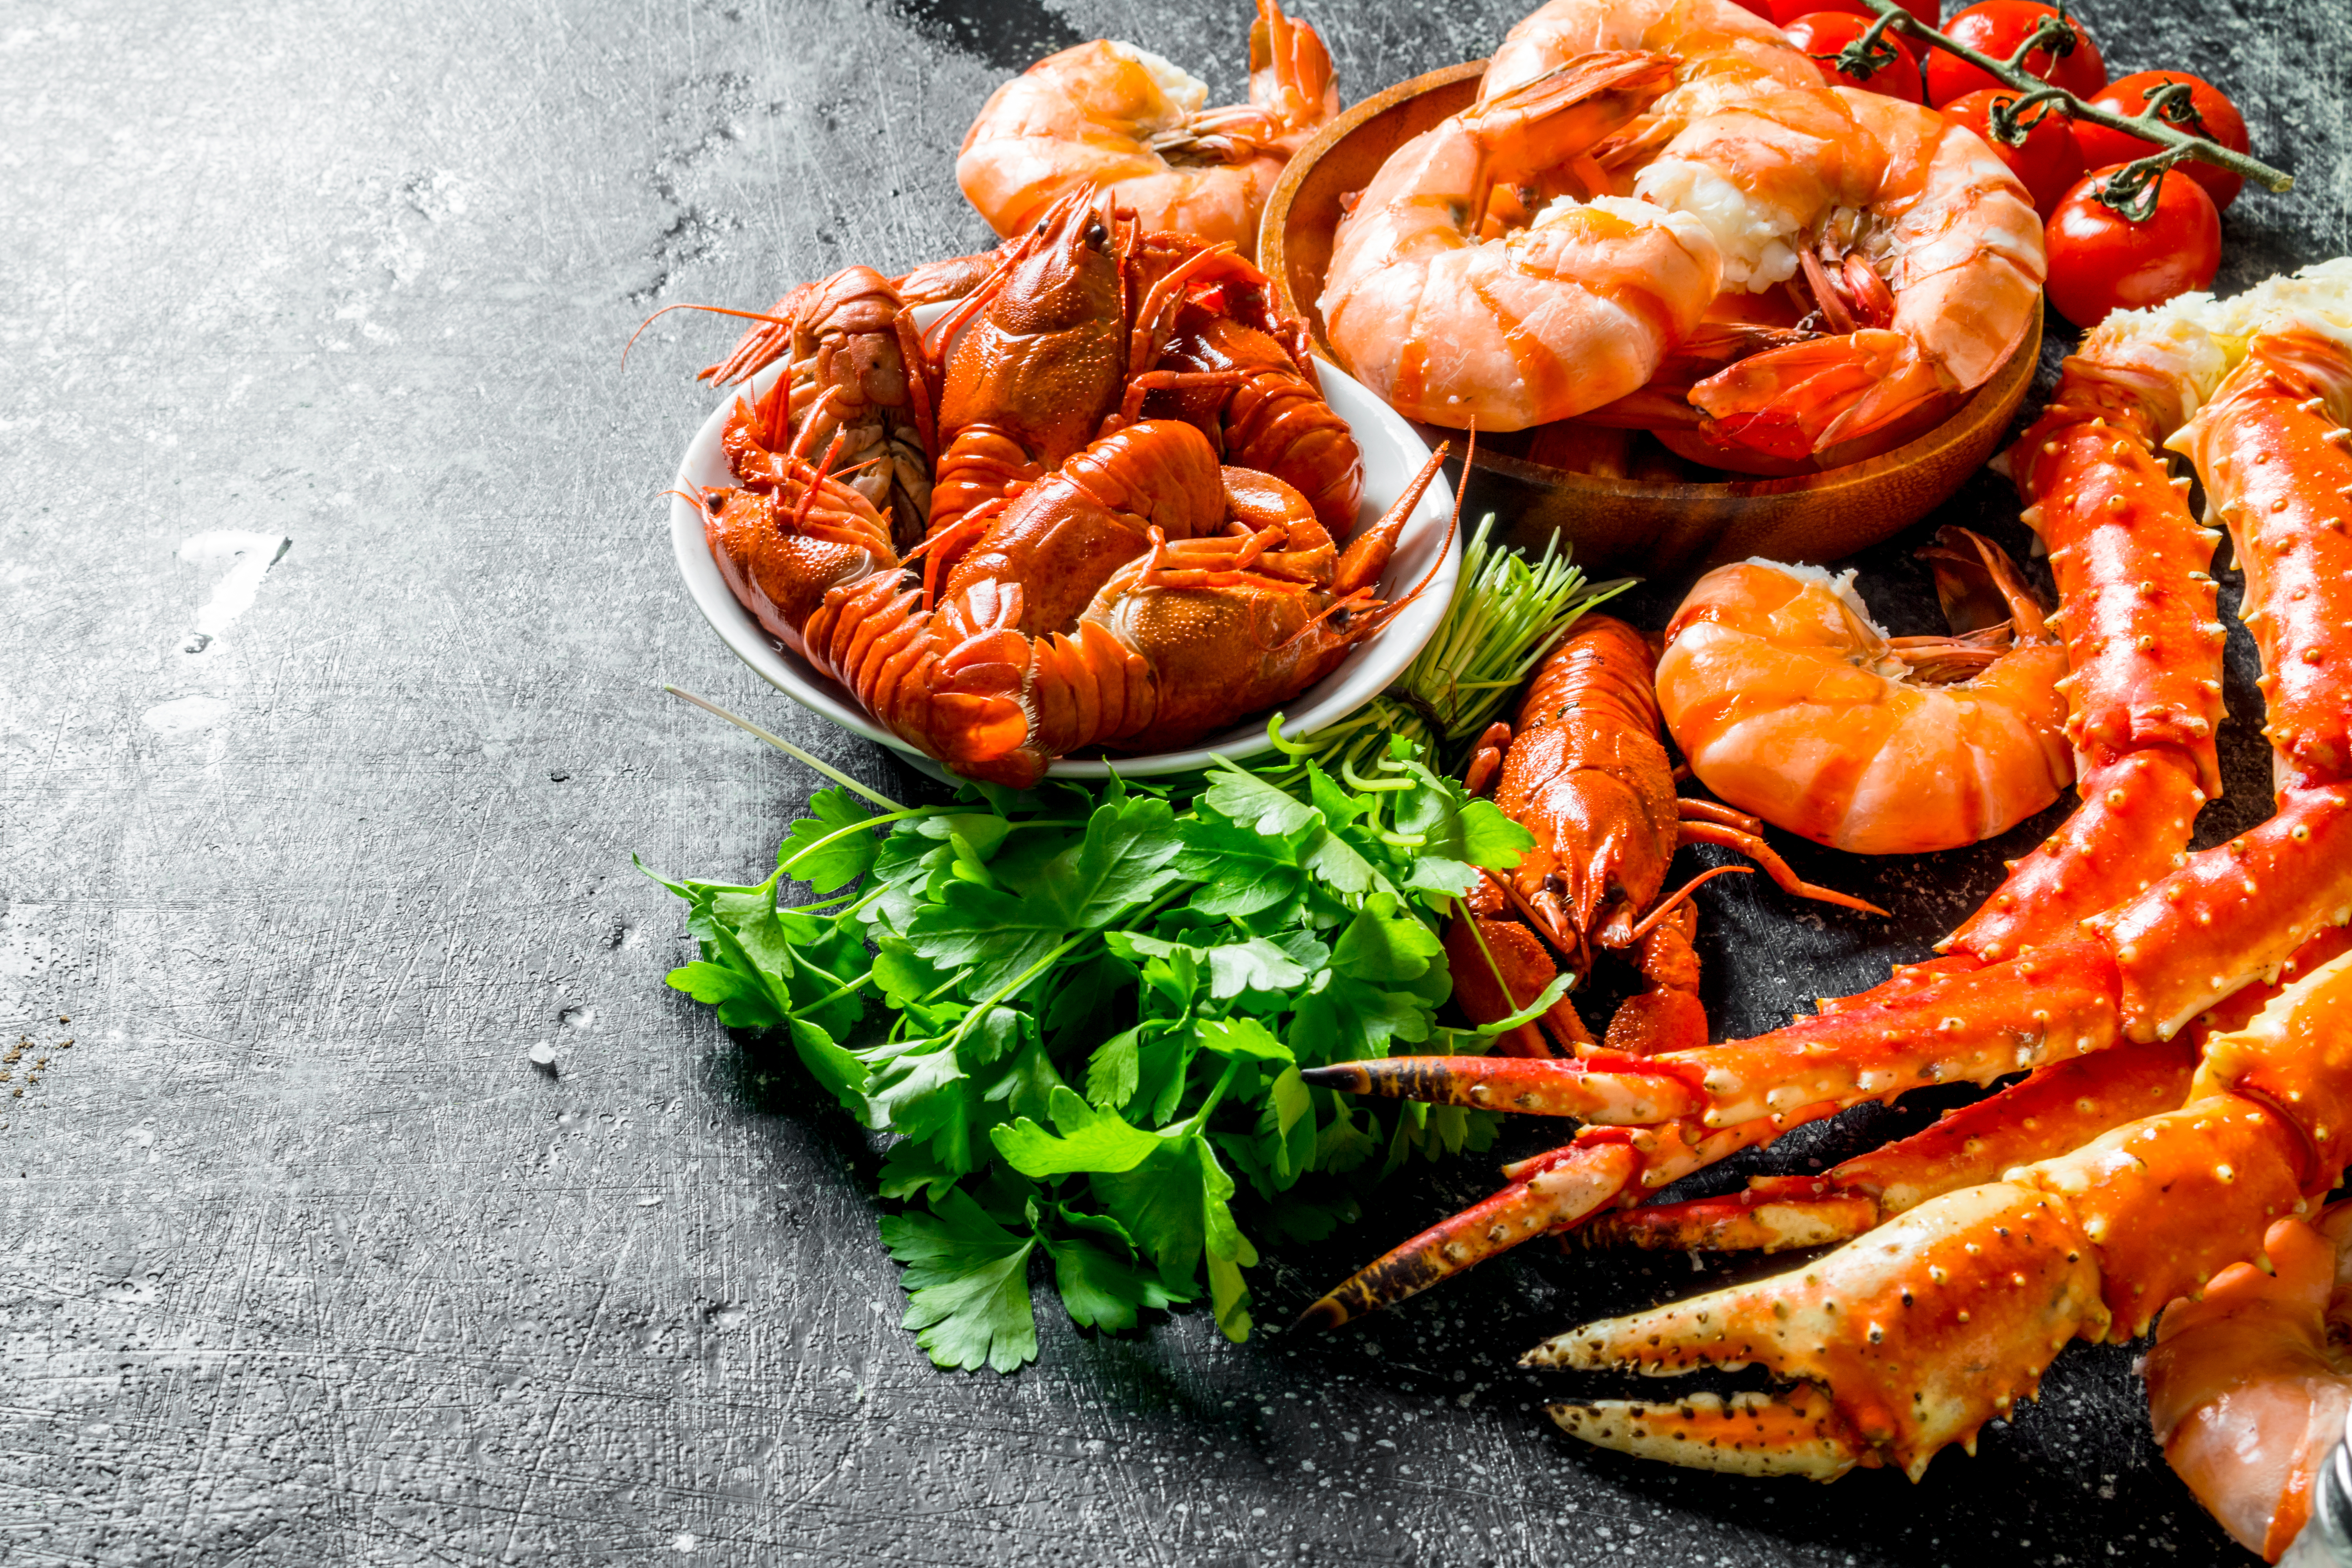 Seafood-Buyers Can’t Resist These Ingredients.